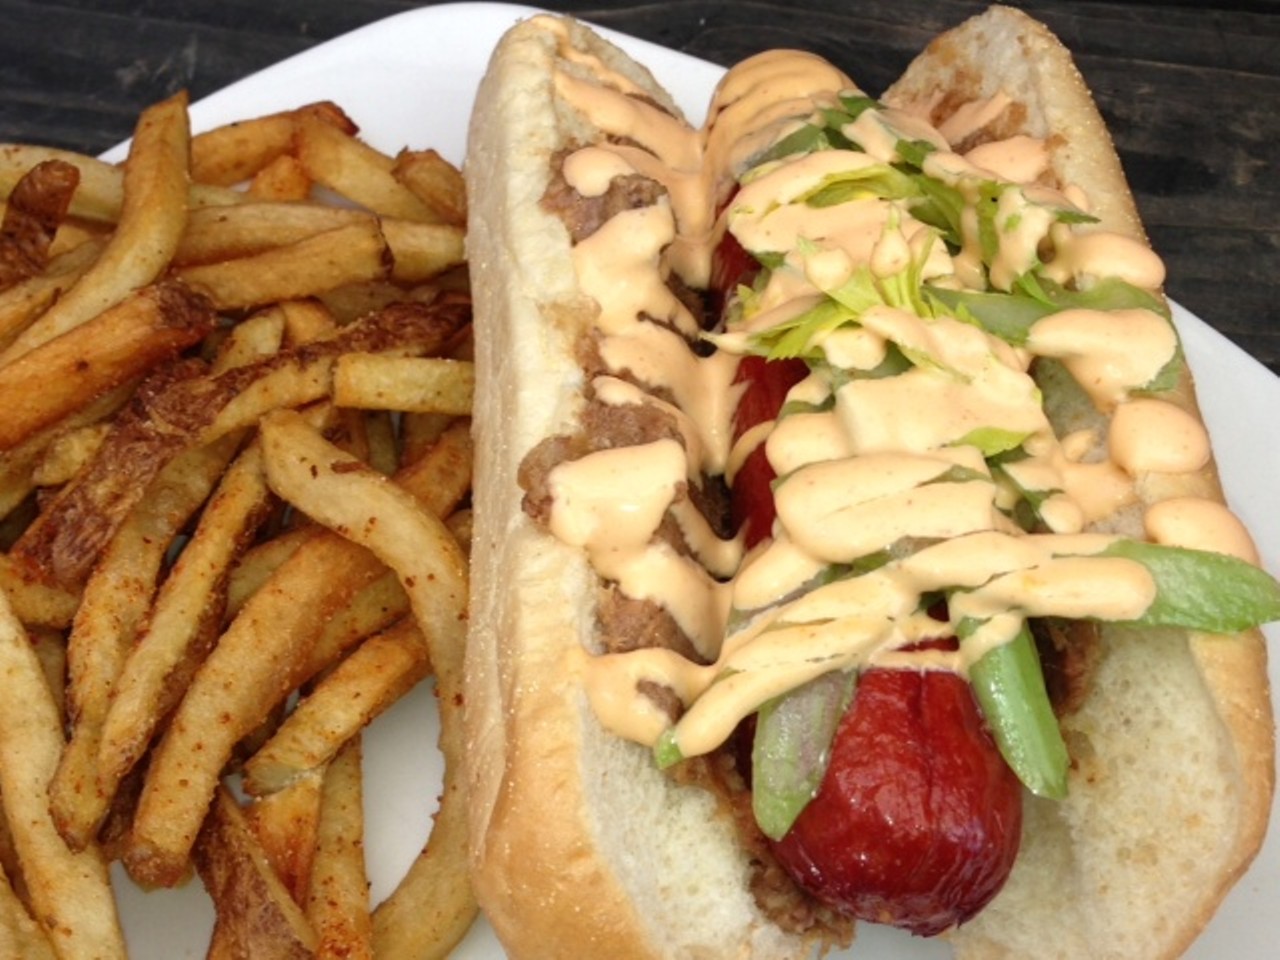 The Windy City all beef hot dog at Market Garden Brewery takes the chi-town staple to a whole new level. The plump dog is topped with bacon jam, celery salt, and to complete the tri-fecta of taste a Sriracha aioli. Market Garden Brewery & Distillery is located at 1947 W 25th St. Call 216-621-4000 or visit marketgardenbrewery.com for more information.